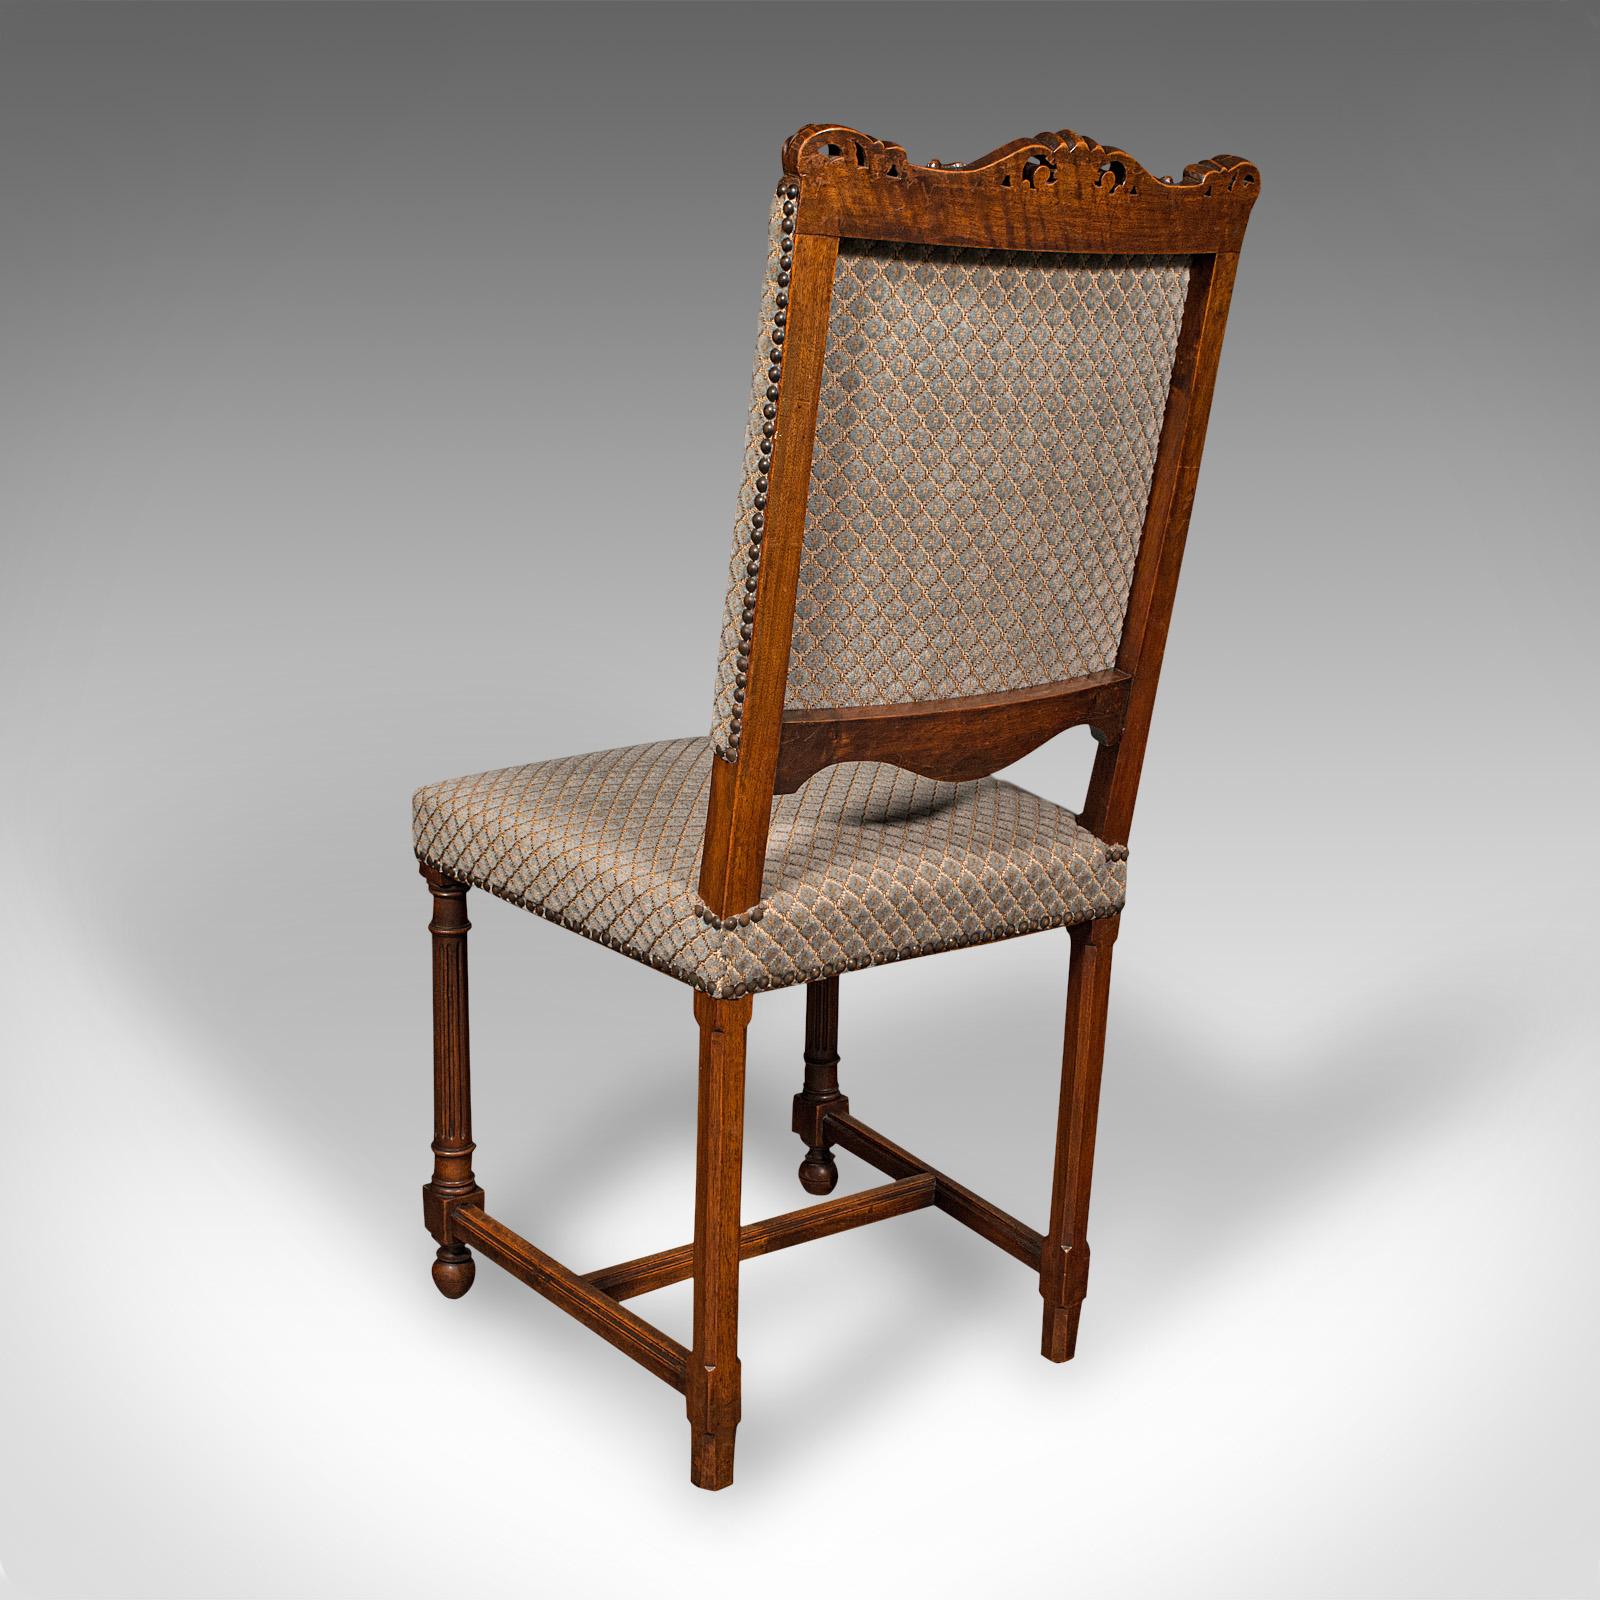 20th Century Set of 8 Antique Dining Chairs, English, Walnut, Carver, Seat, Edwardian, c.1910 For Sale